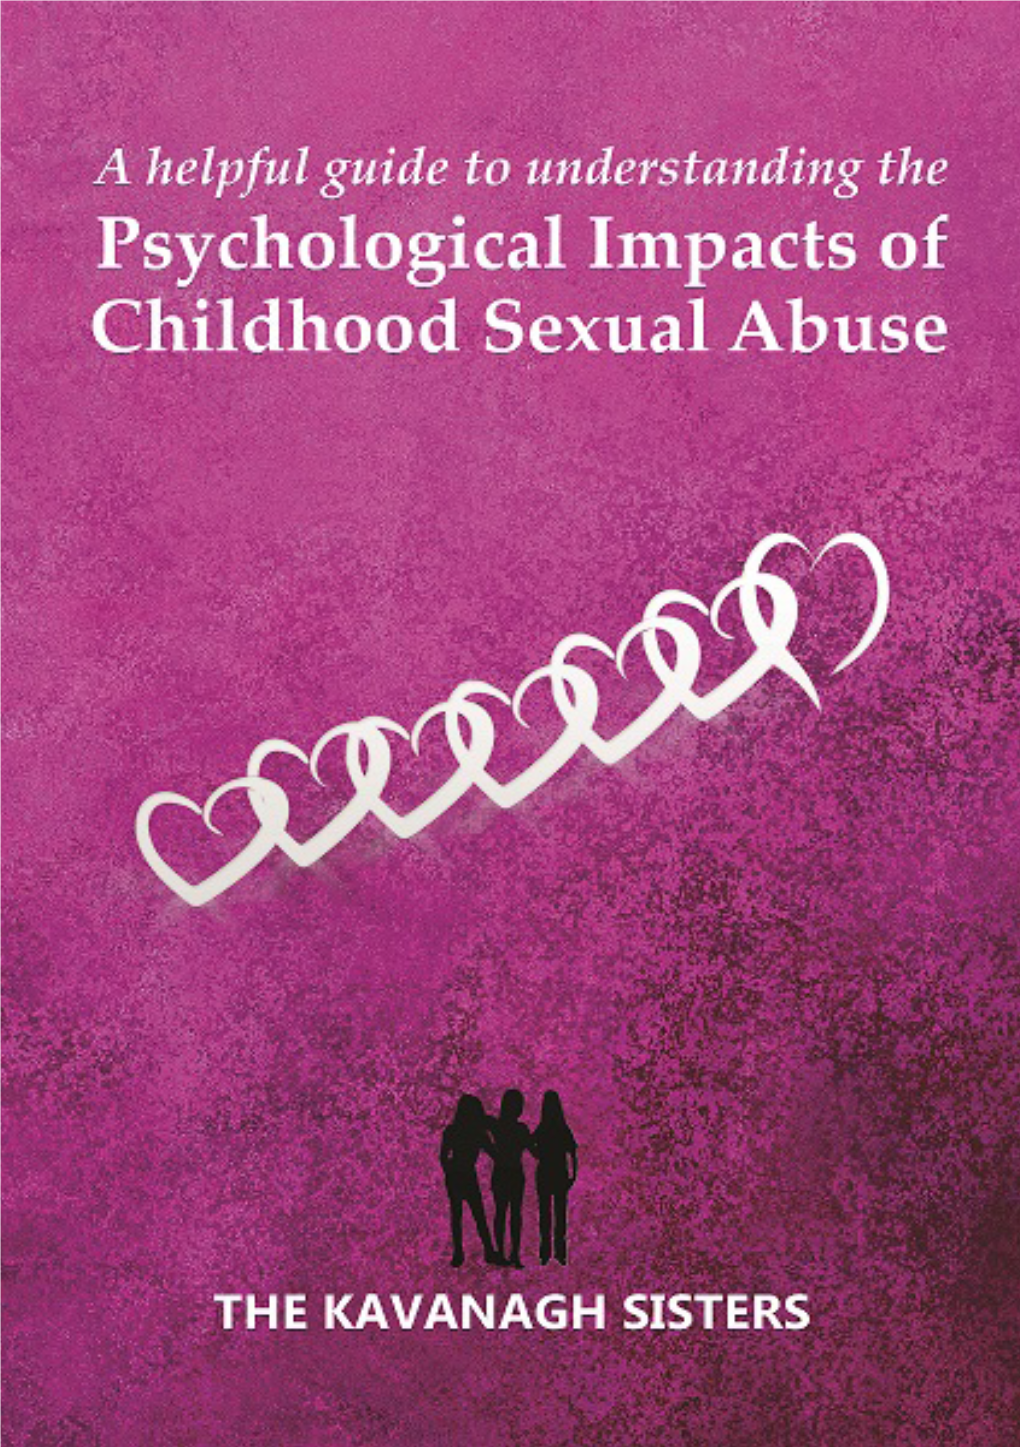 A Helpful Guide to Understanding the PSYCHOLOGICAL IMPACTS of CHILDHOOD SEXUAL ABUSE